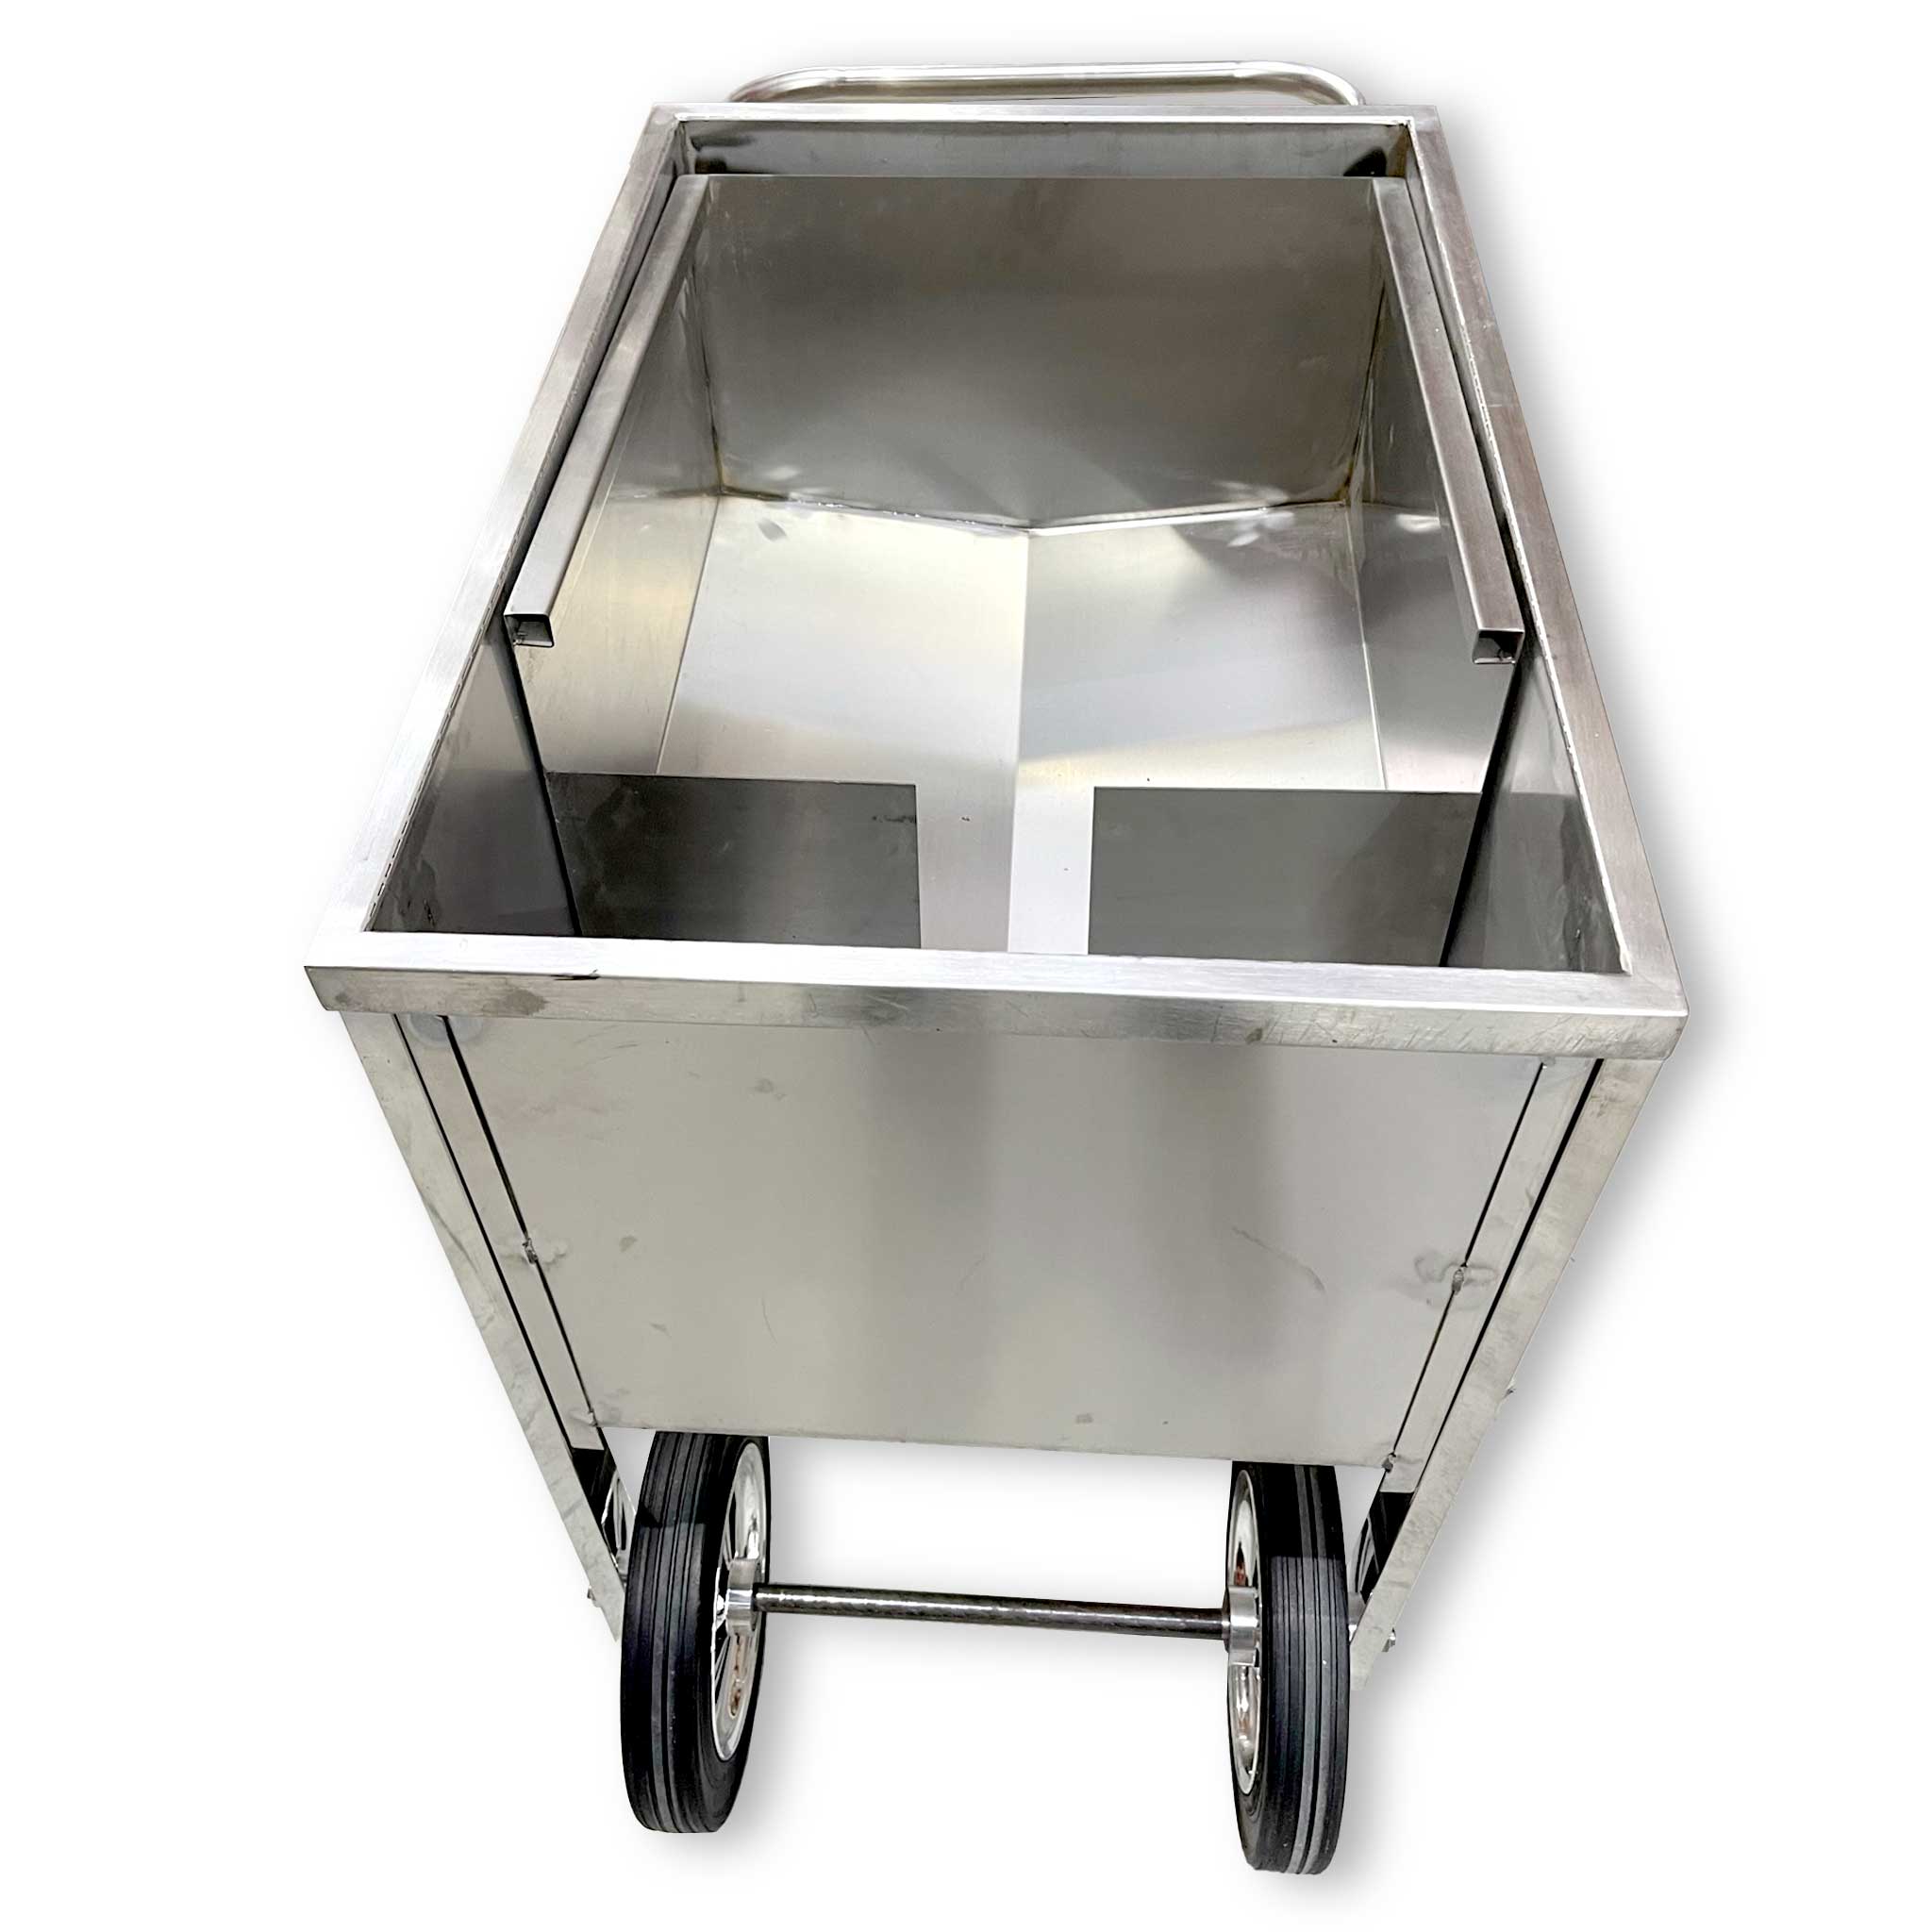 Solar Wax Extractor Stainless-steel with Wheels and Handle -  collection by Buzzbee Beekeeping Supplies